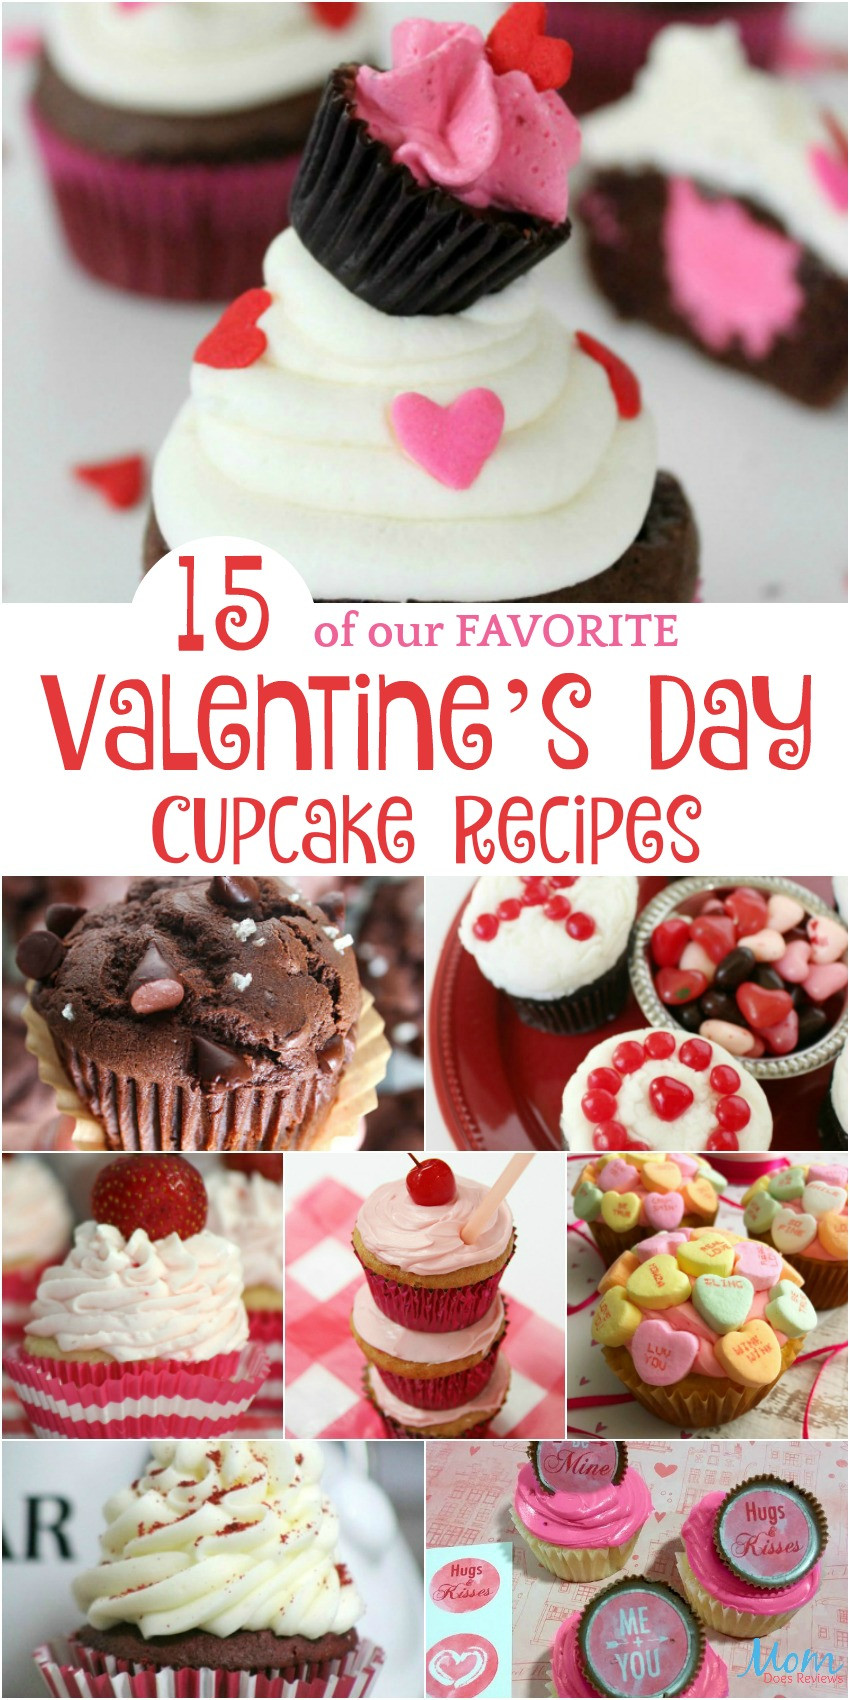 Valentines Day Cupcakes Recipes
 15 of our FAVORITE Valentine s Day Cupcake Recipes